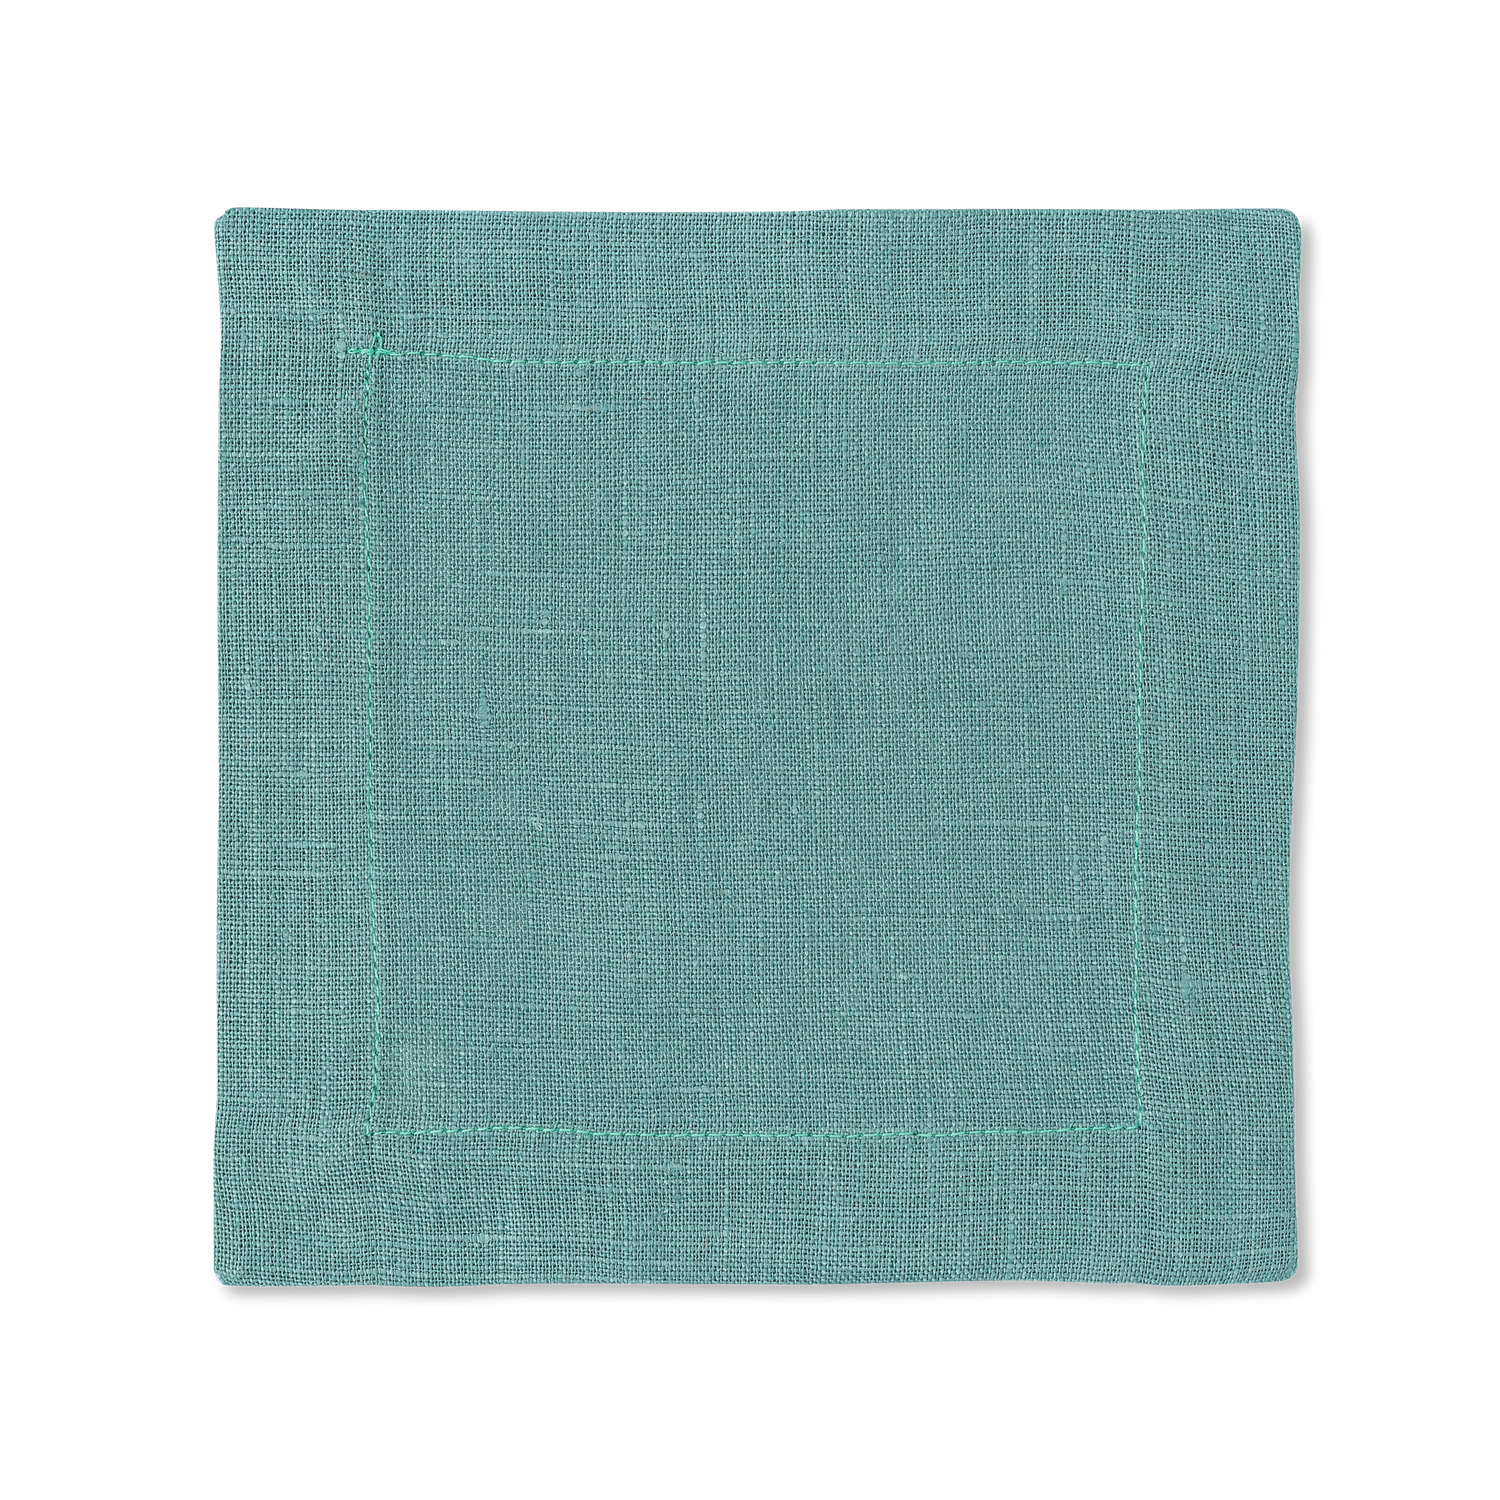 A square linen cocktail napkin in the color marine